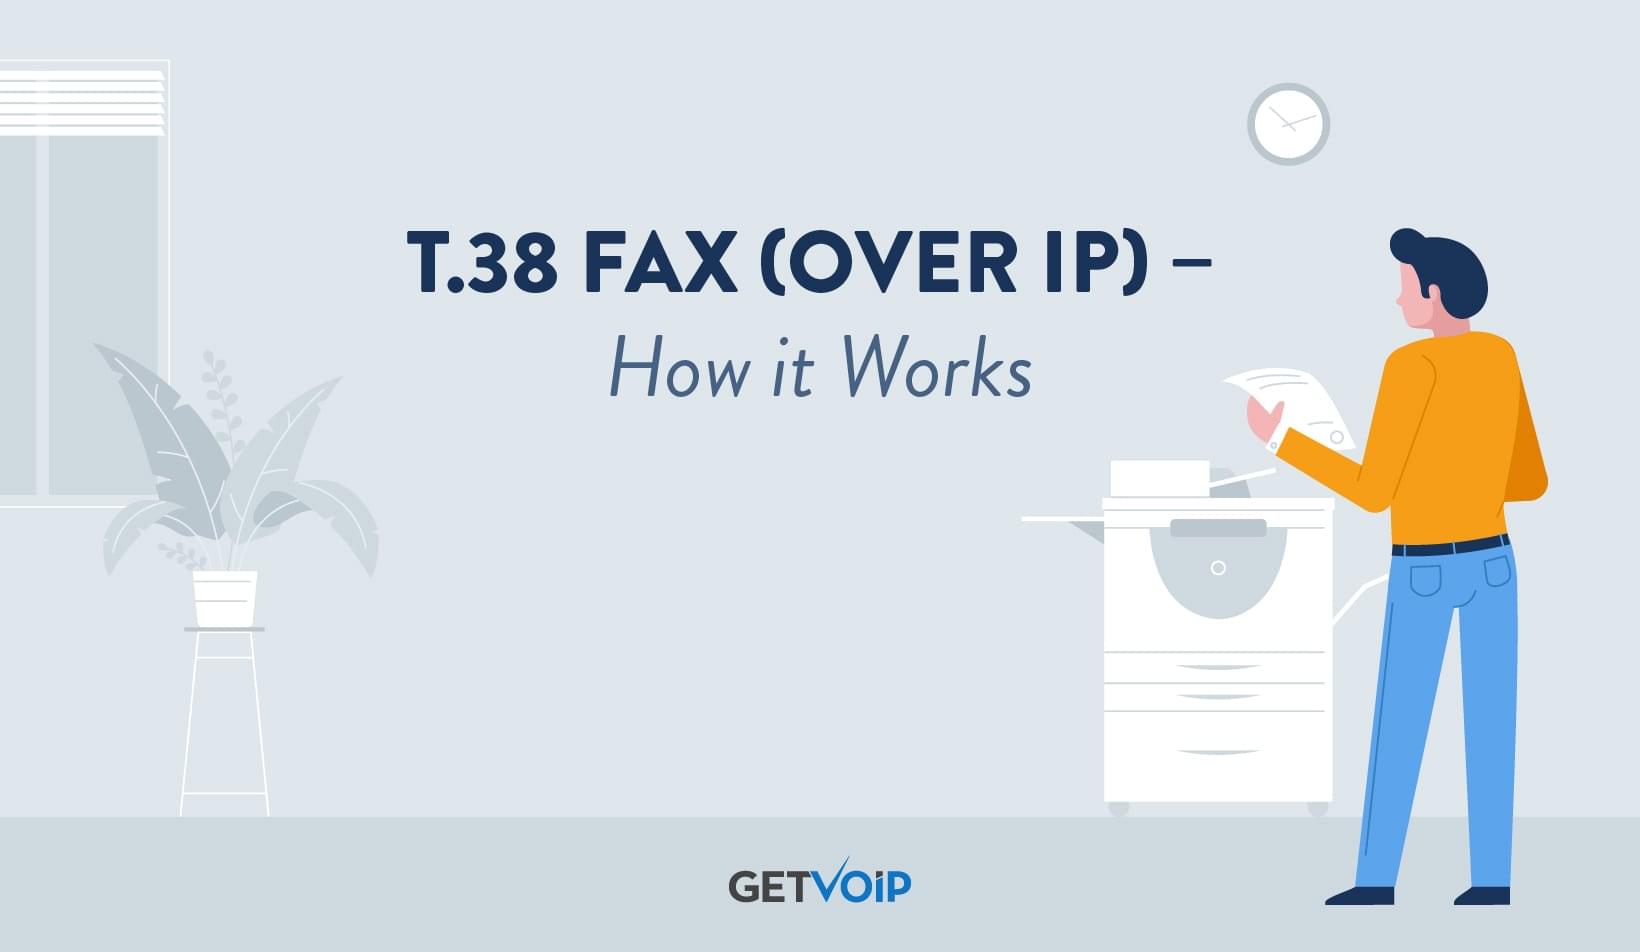 T.38 Fax Over IP: What it is & How it Works